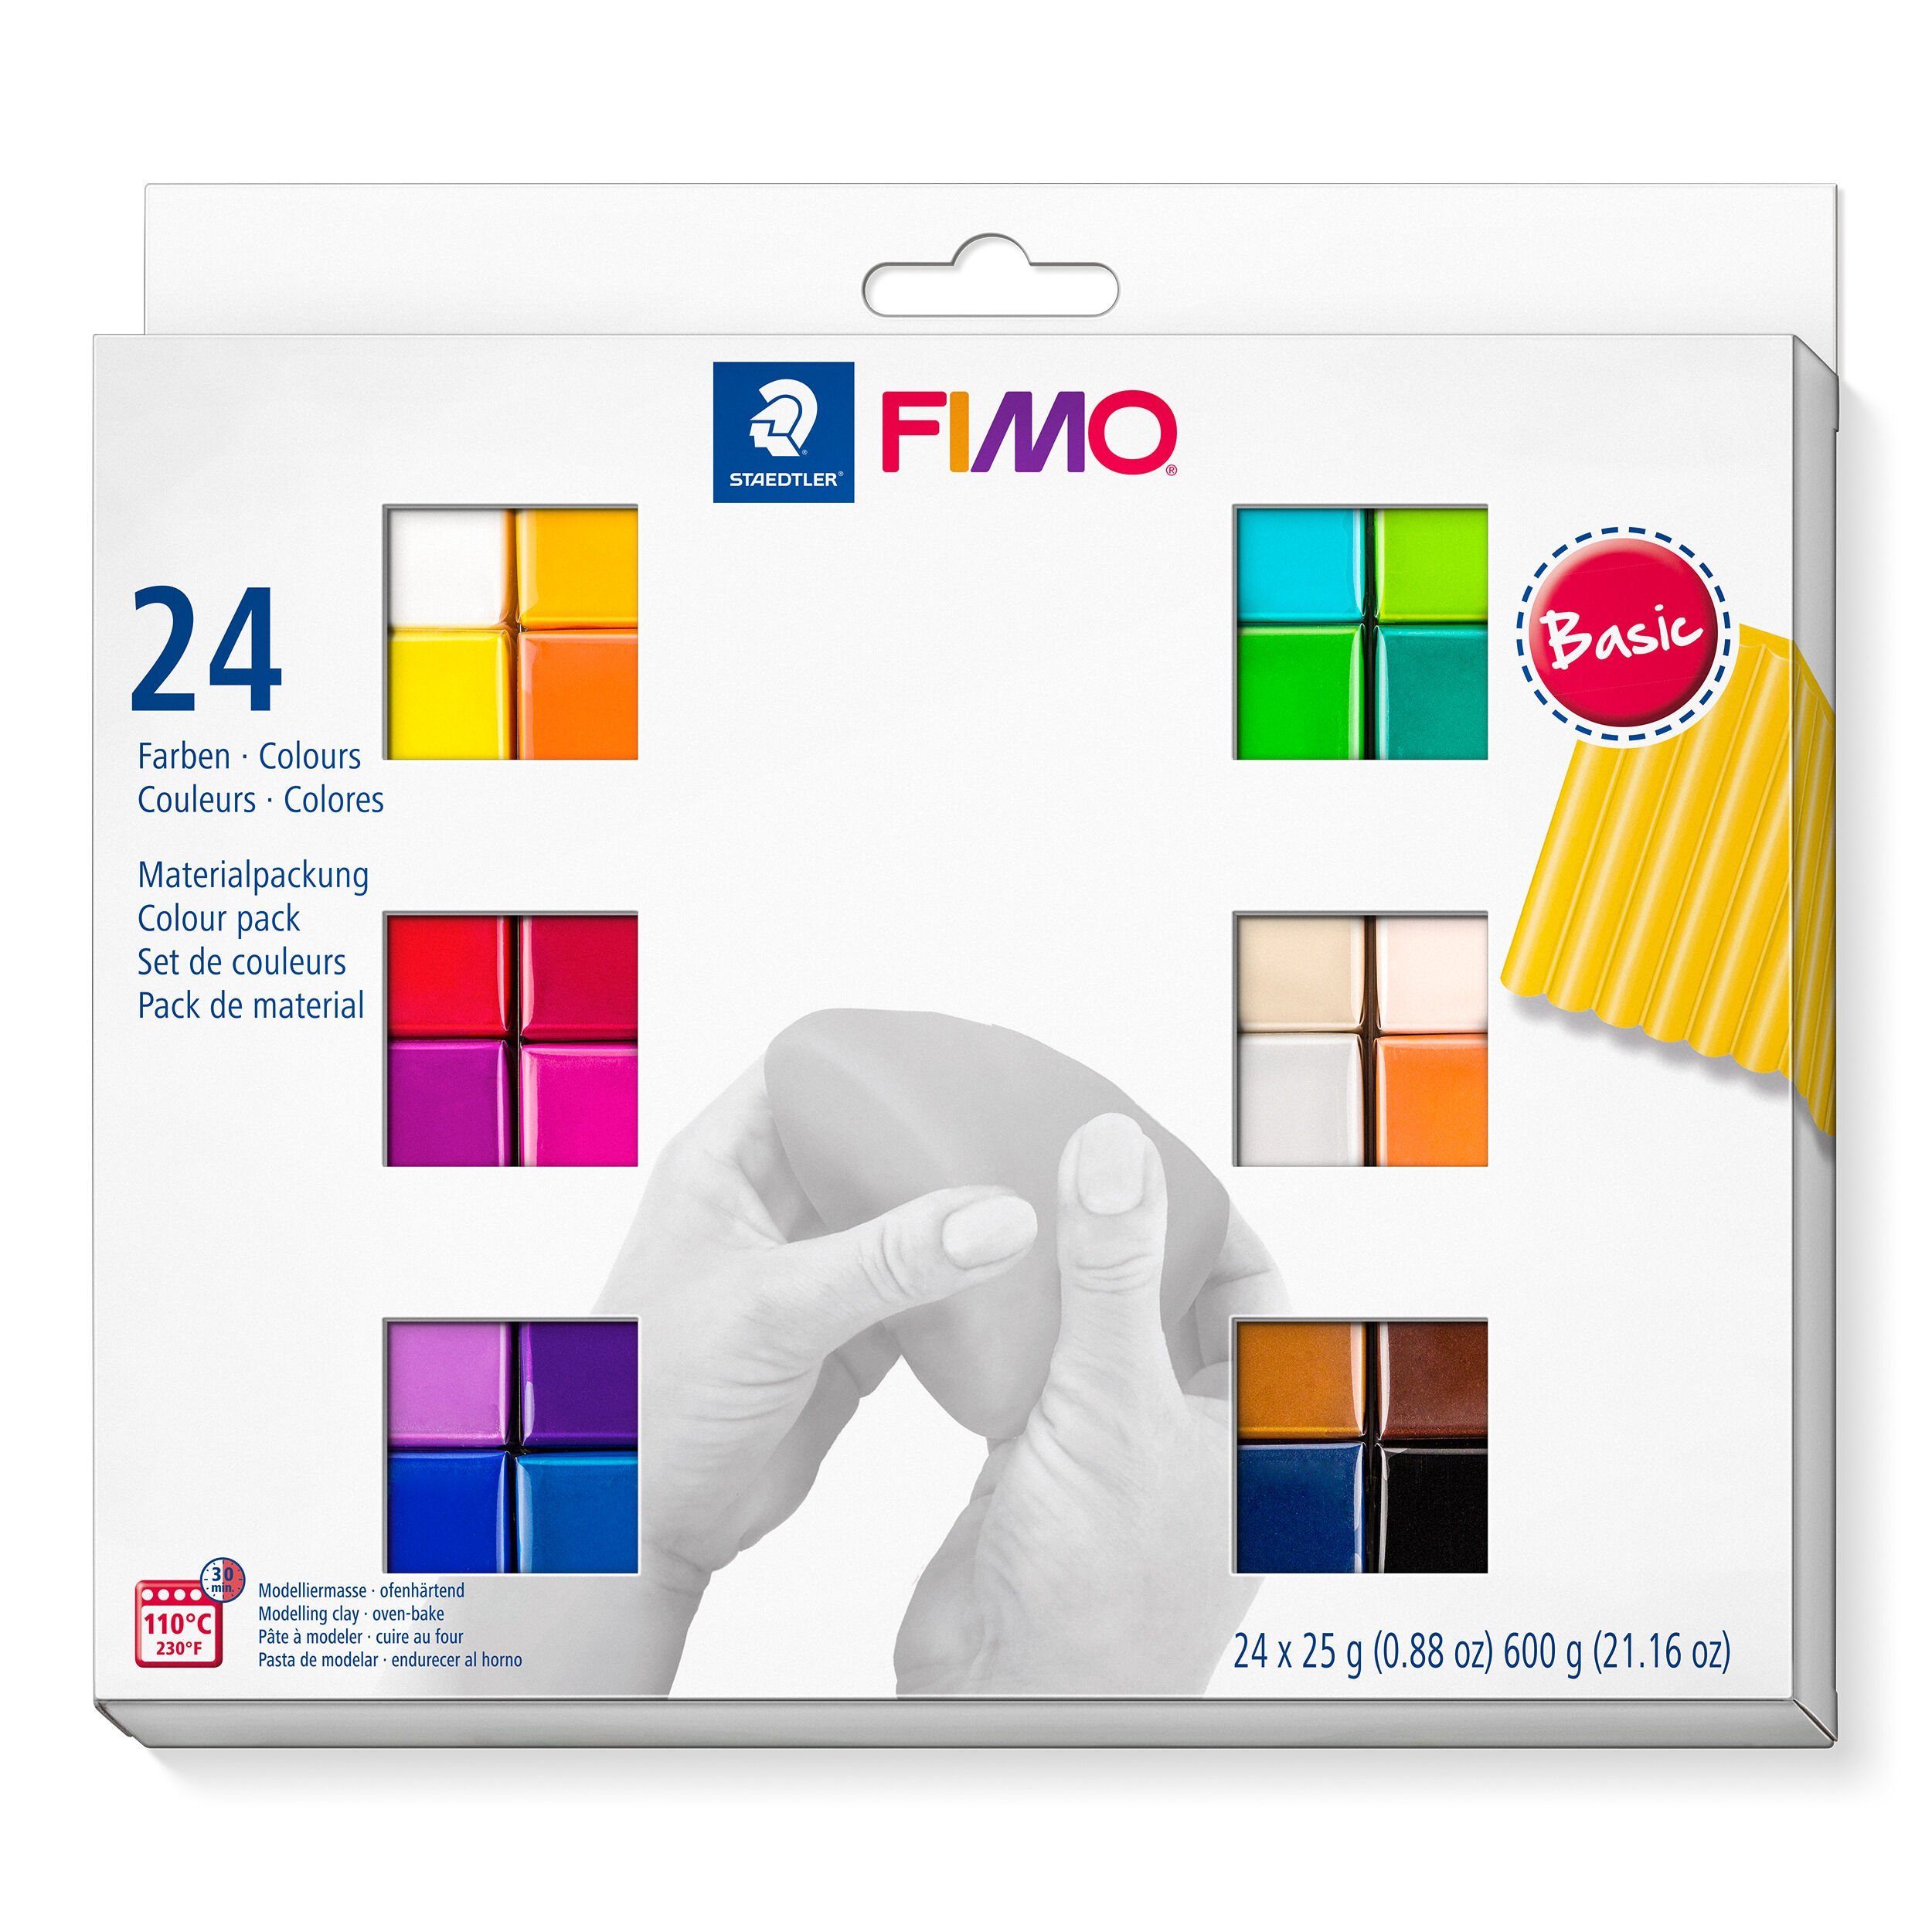 FIMO Staedtler 8013 C12-1 FIMO Effect Half Blocks Pack of 12 4007817053461 Assorted Colours 